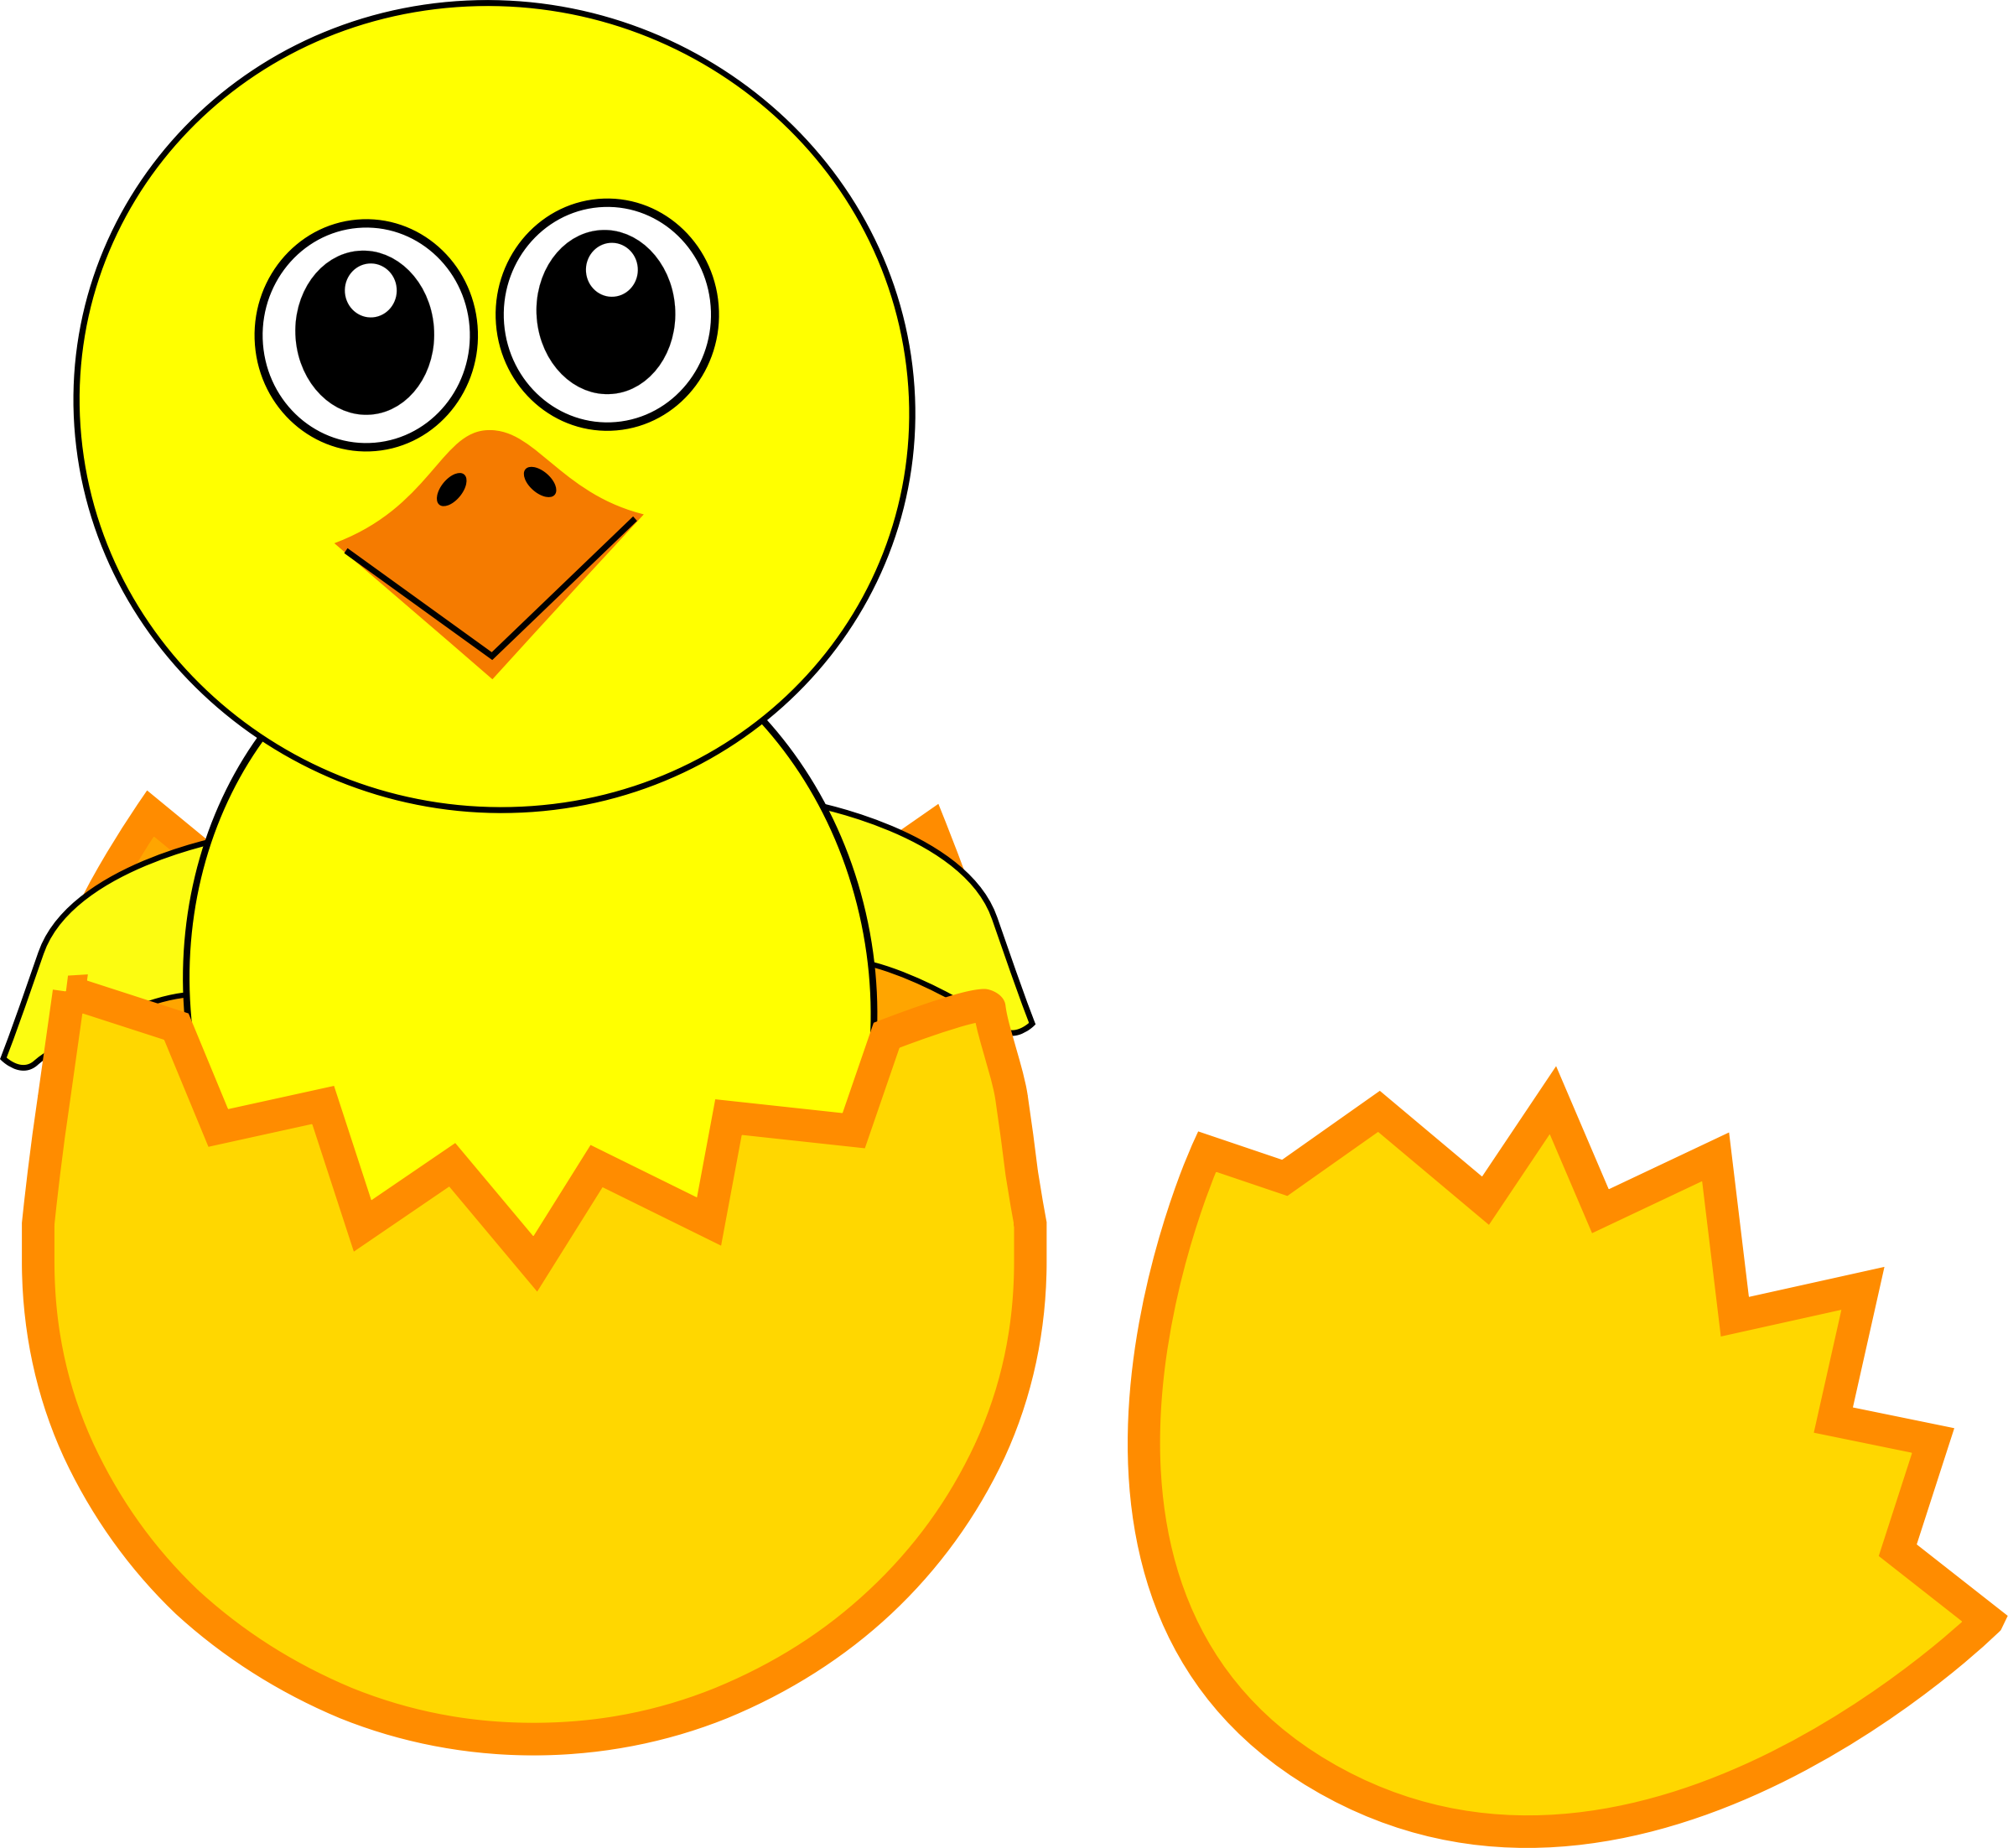 Clipart - Funny Chick Cartoon Newborn Coming Out from the Egg